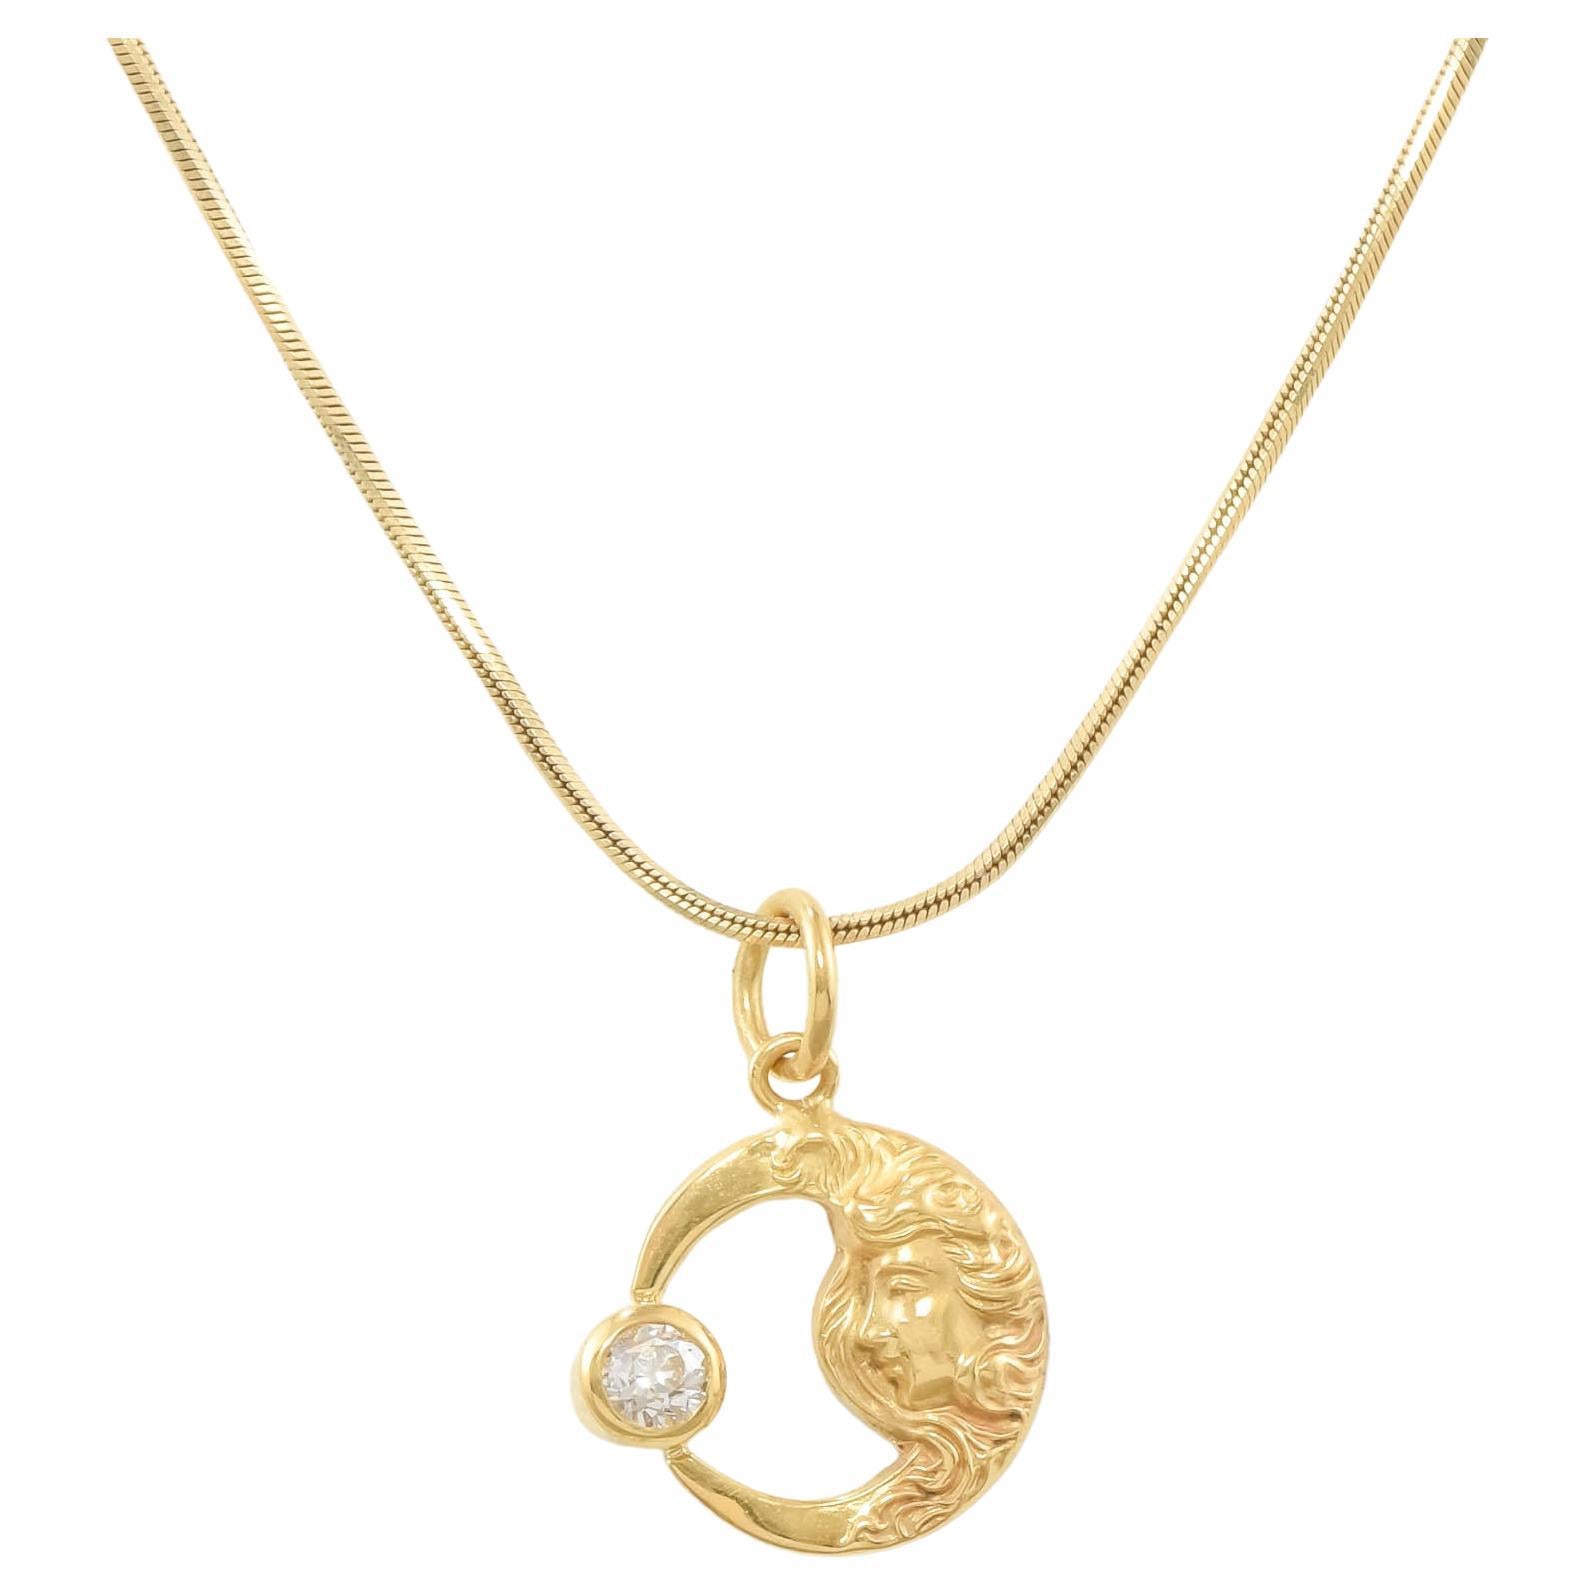 Tiny Gold Celestial Charm Necklace - Art Nouveau 'Lady in the Moon' with Diamond For Sale